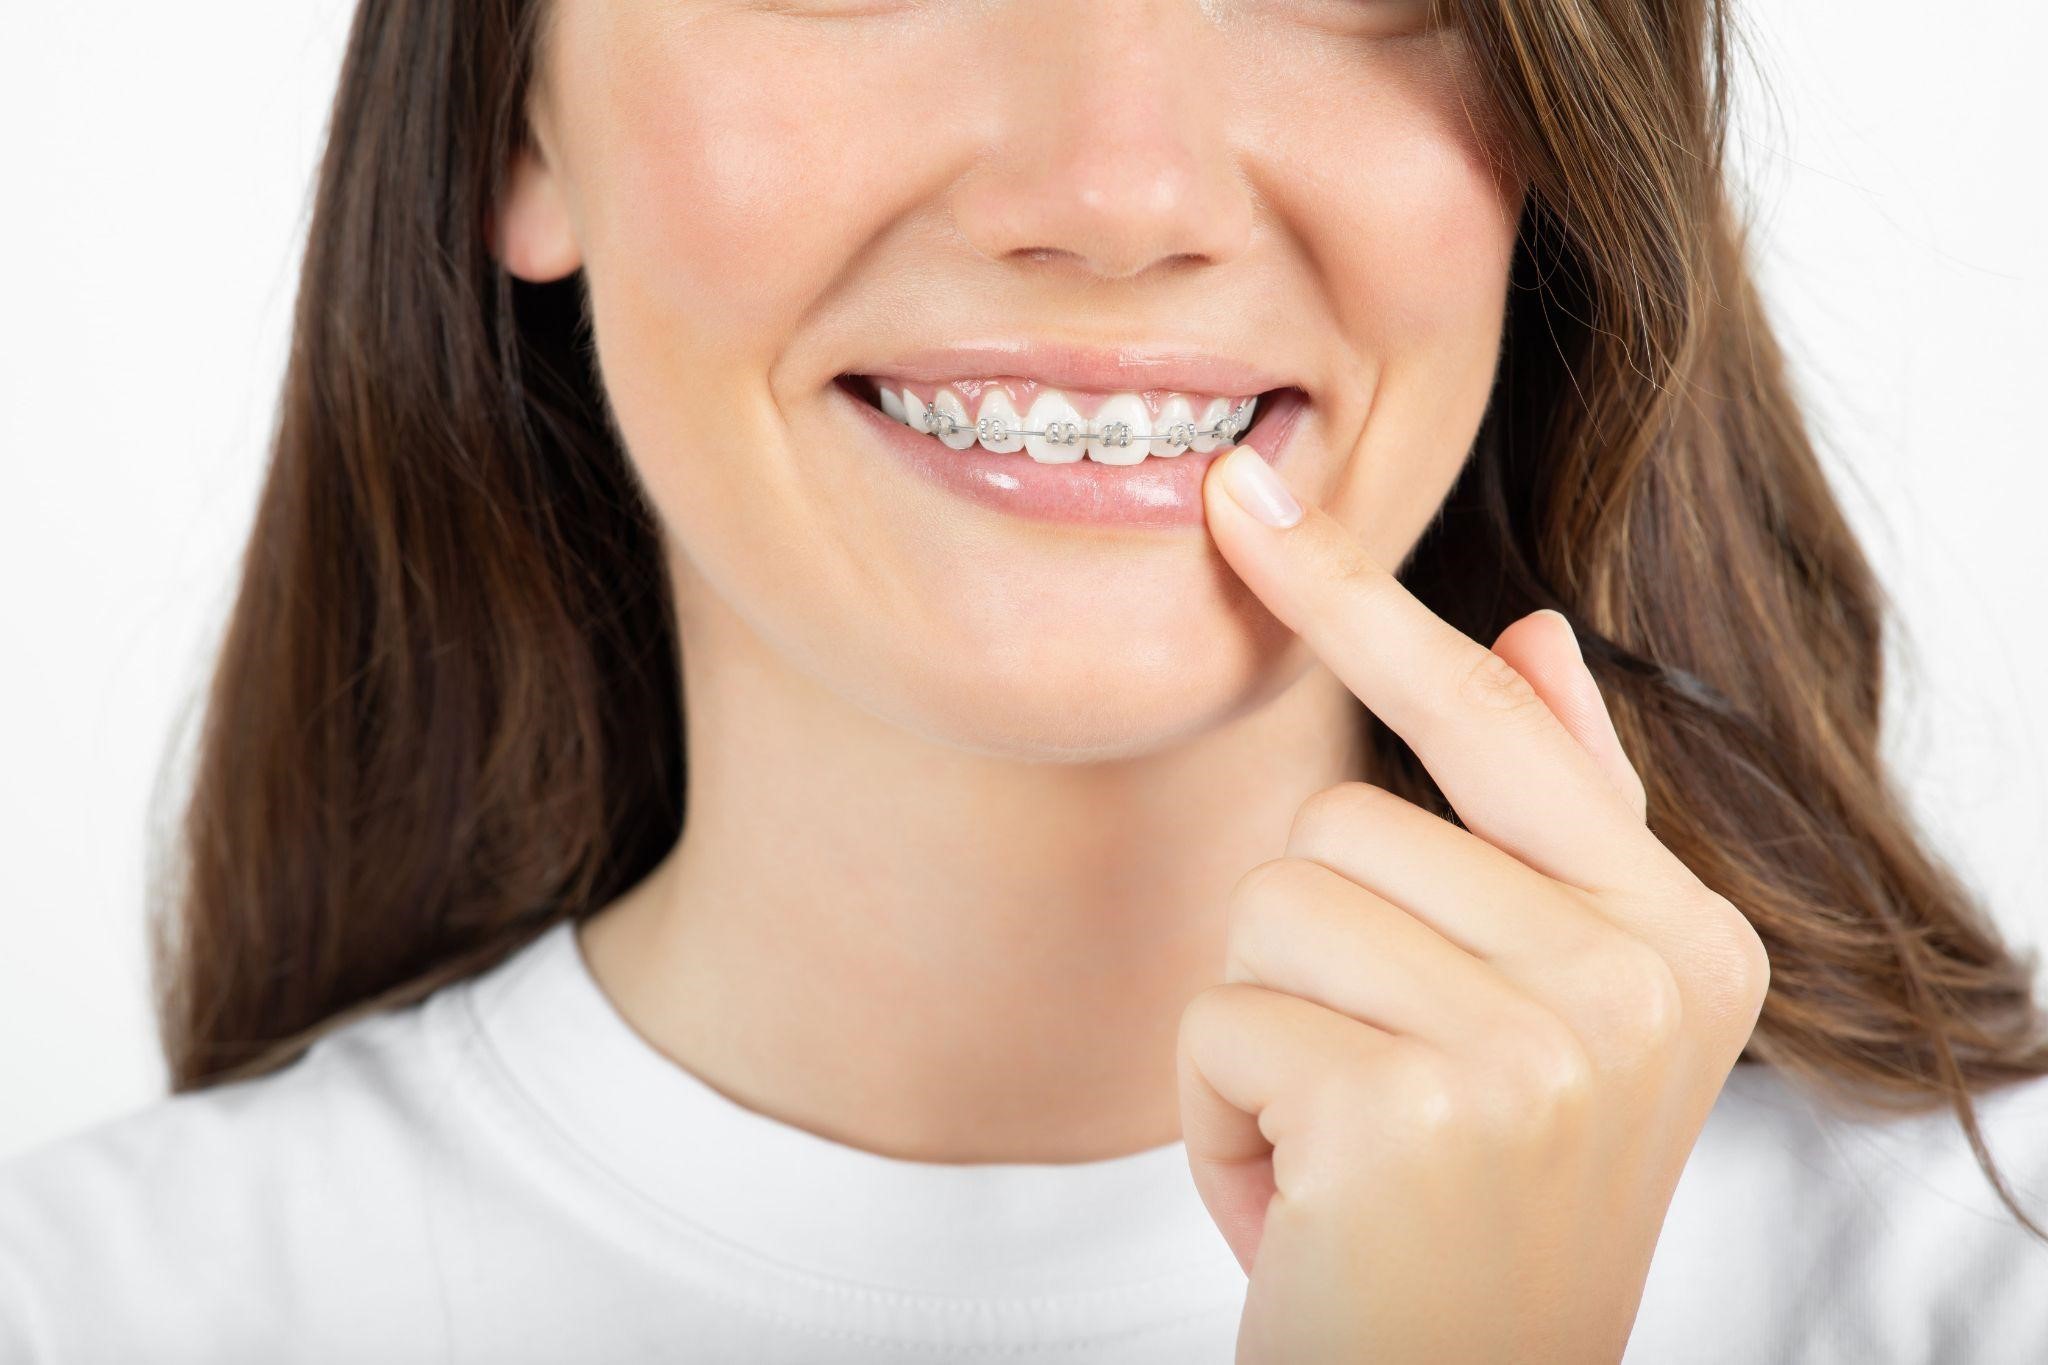 Dental Braces Ottawa - Starting at $5,495 with no interest monthly